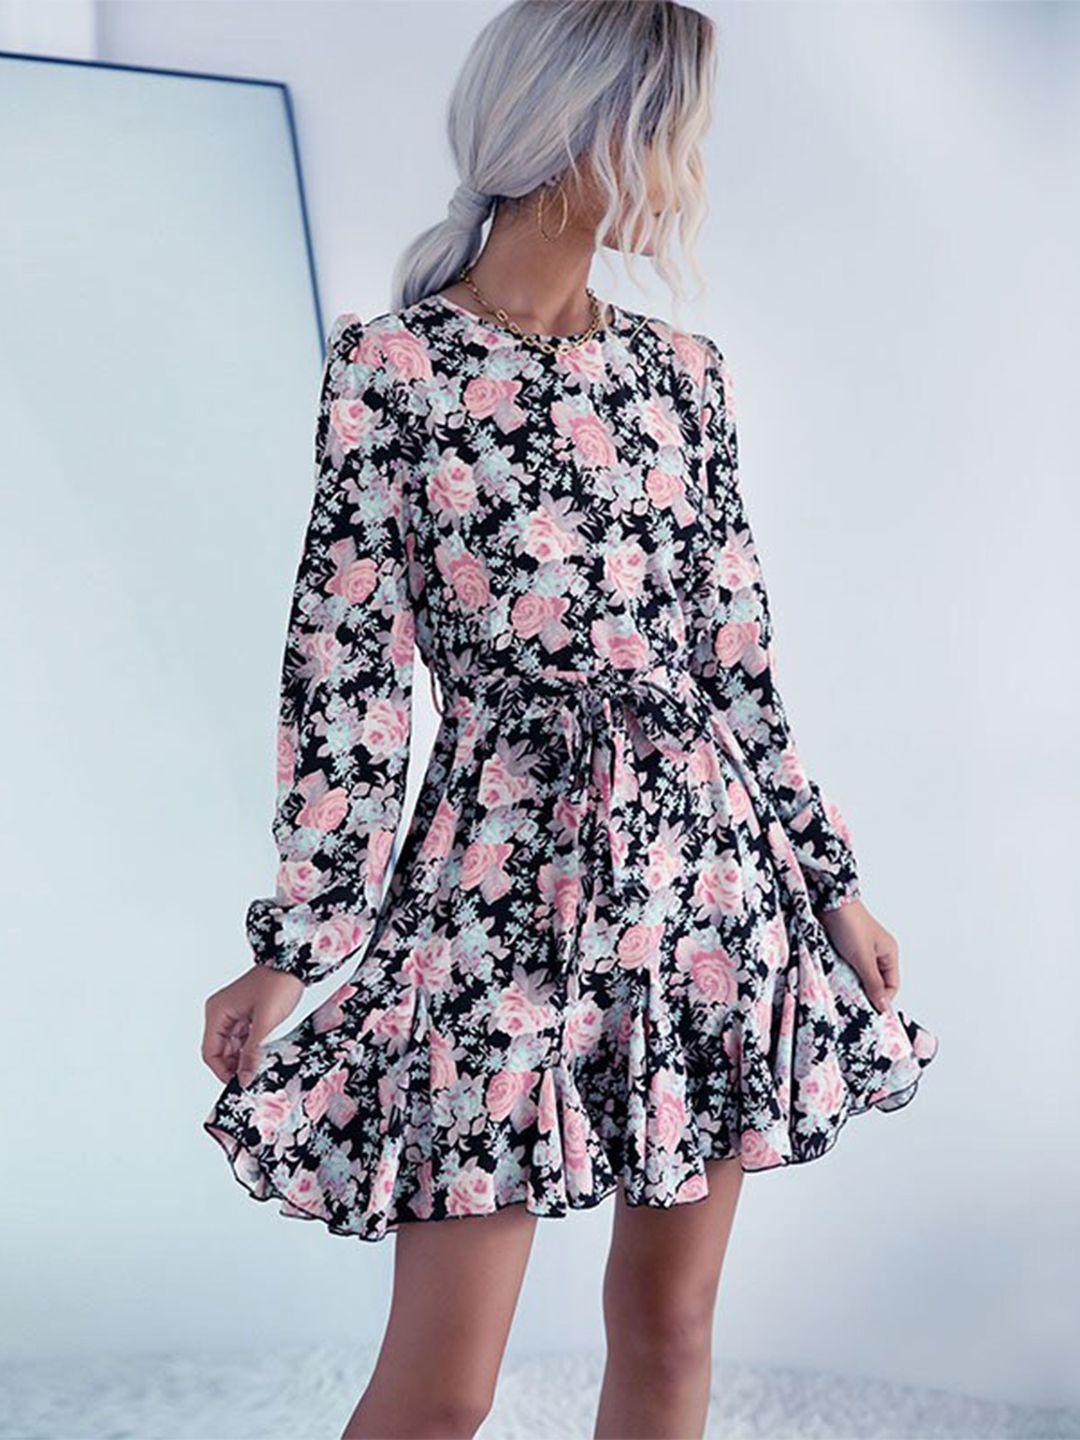 stylecast floral print fit and flare dress